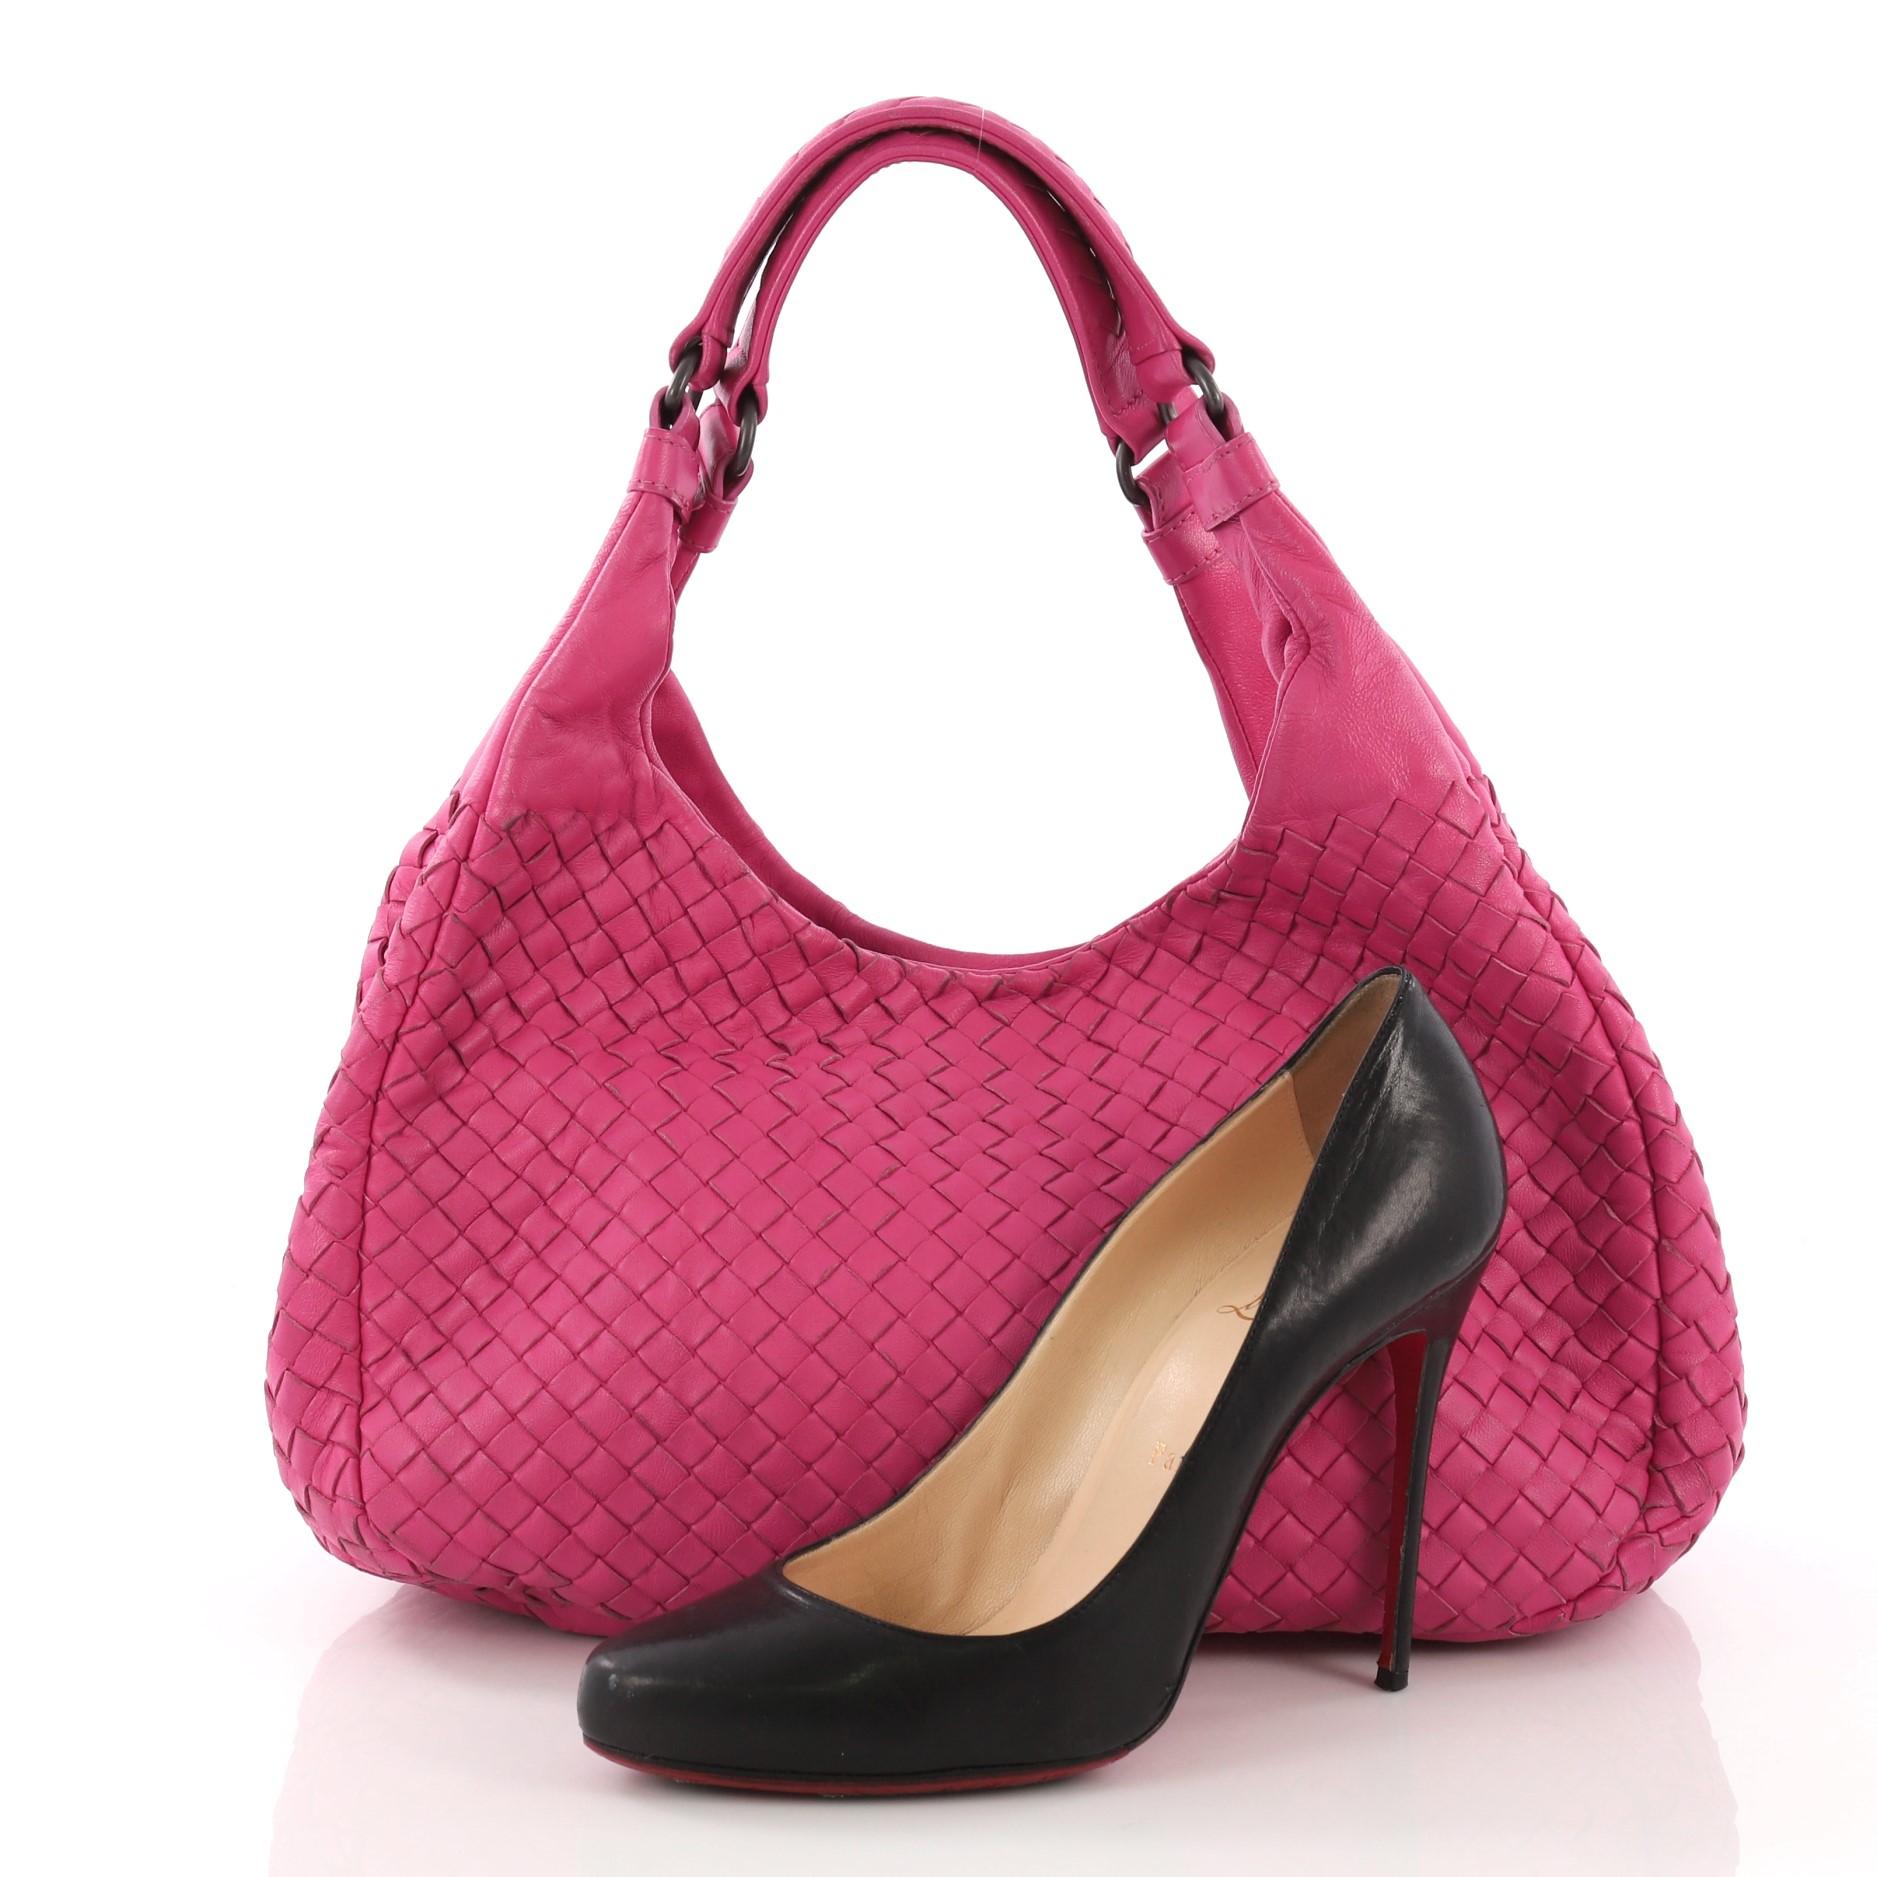 This Bottega Veneta Campana Hobo Intrecciato Nappa Small, crafted in pink intrecciato nappa leather, features dual shoulder straps and matte gunmetal-tone hardware. Its hidden magnetic snap closure opens to a brown suede interior with slip and zip